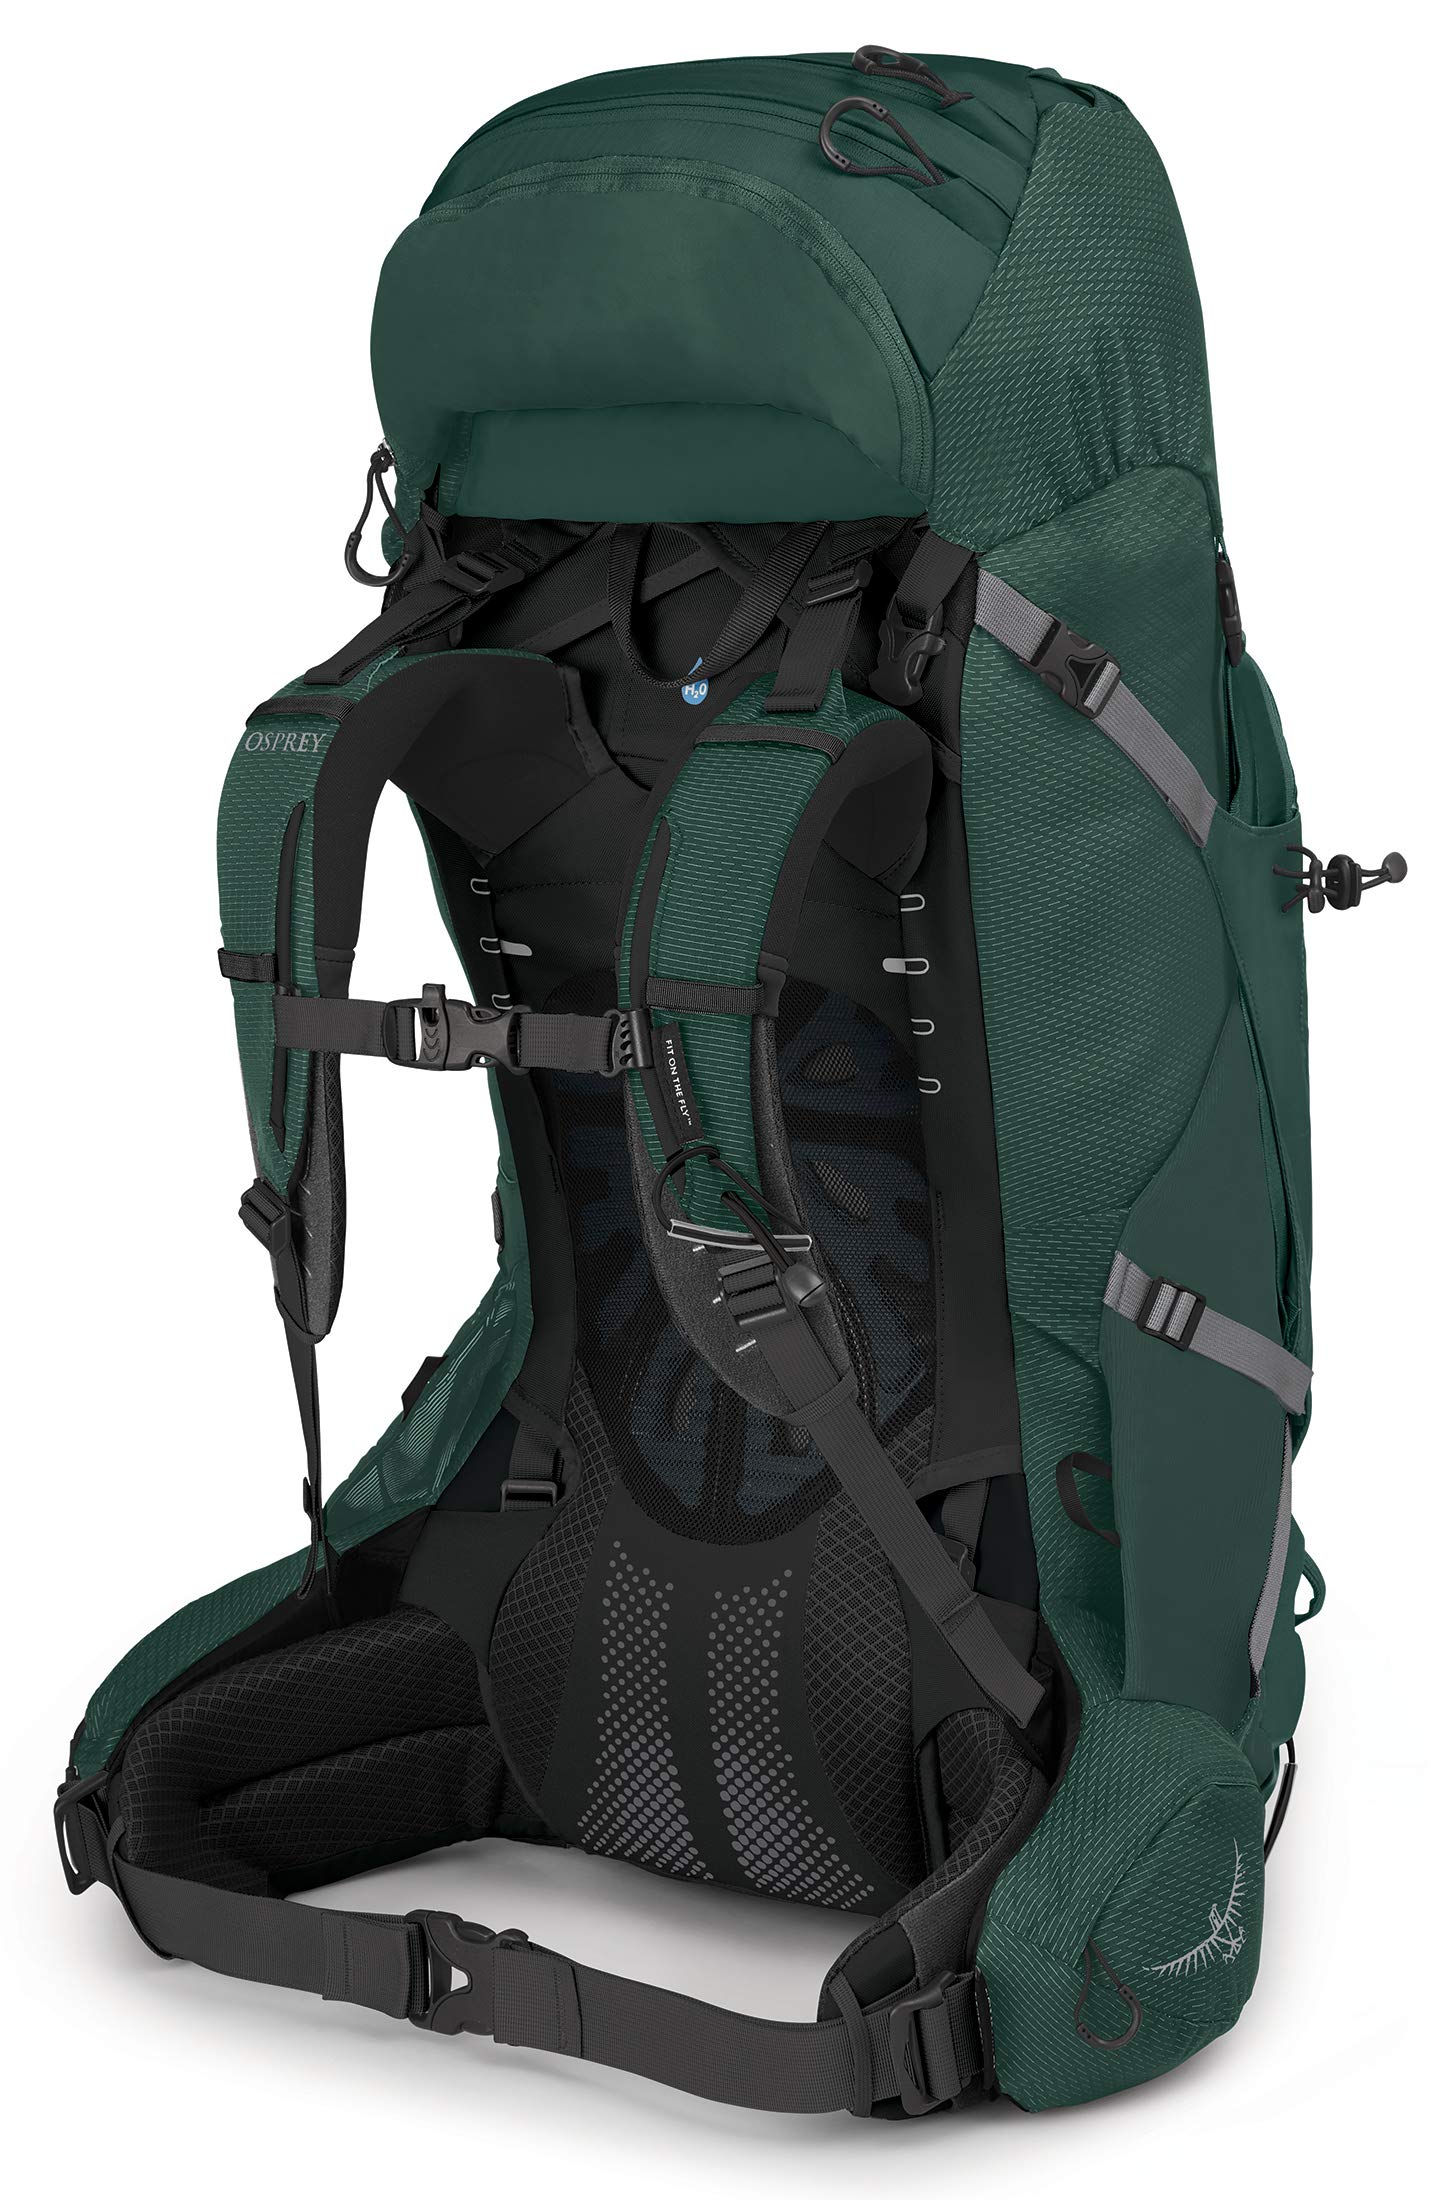 Osprey Aether Plus 60L Men's Backpacking Backpack, Axo Green, S/M